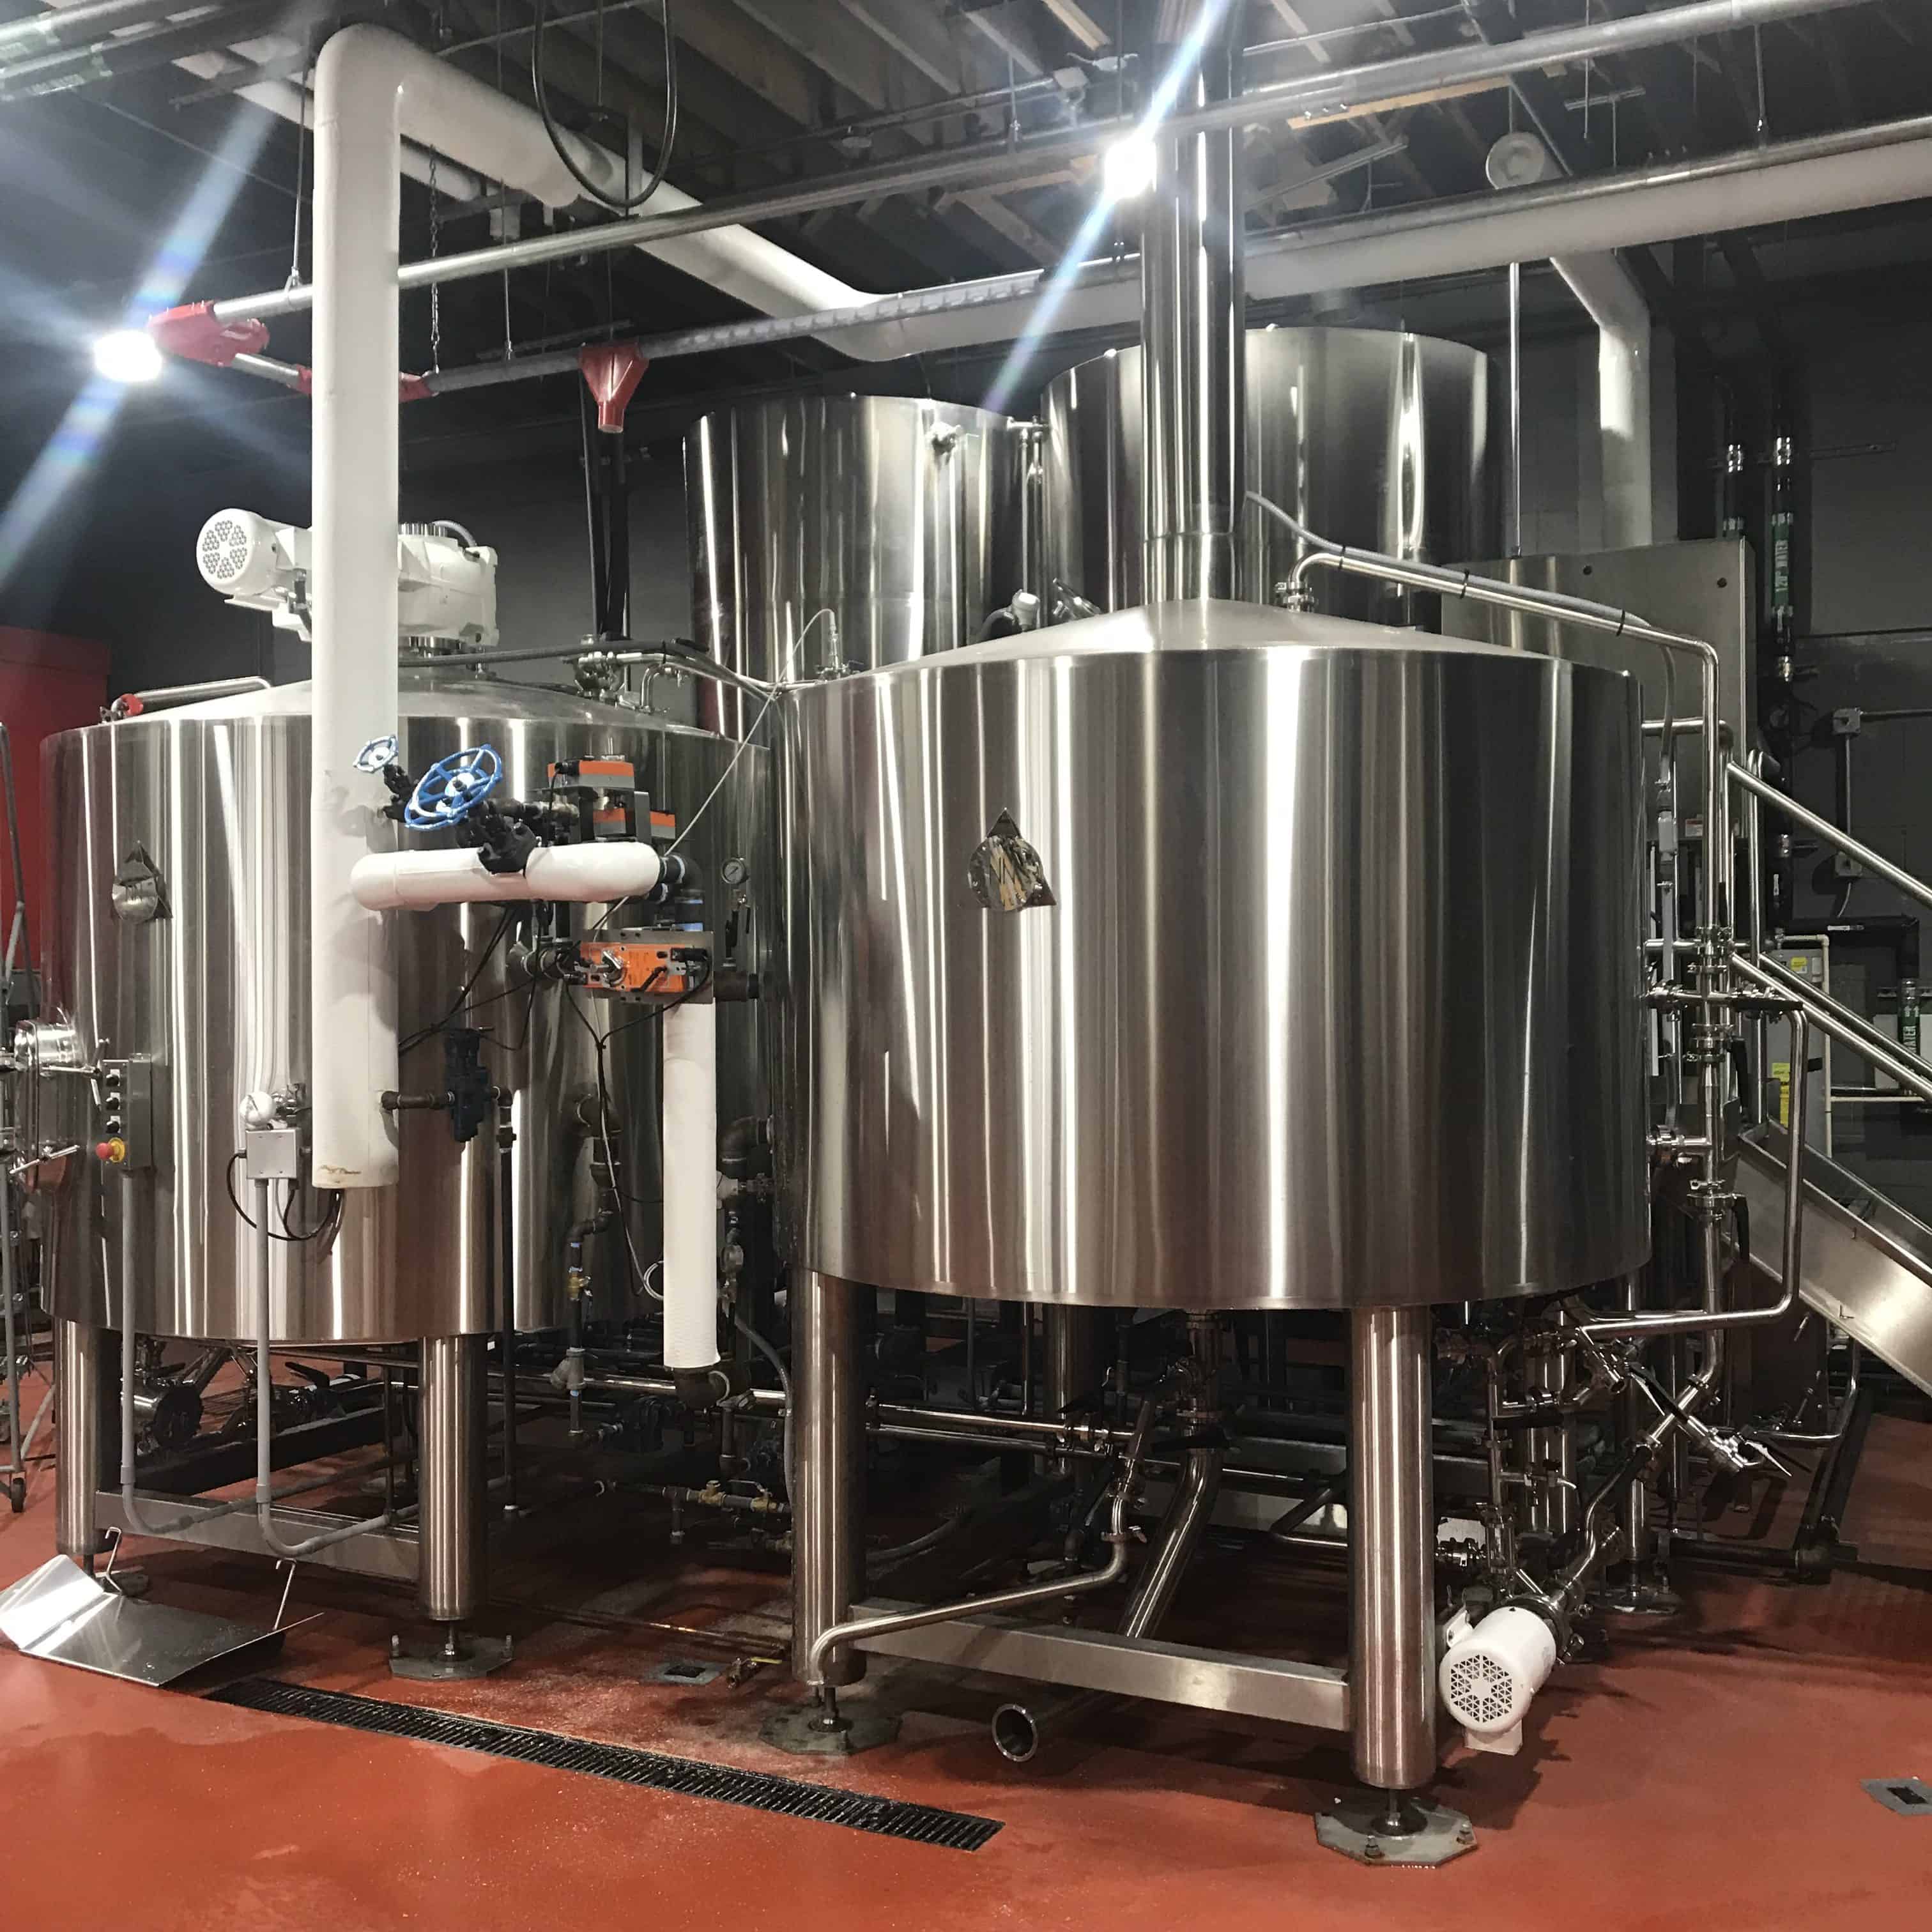 Requirements for a great brewery floor coating system